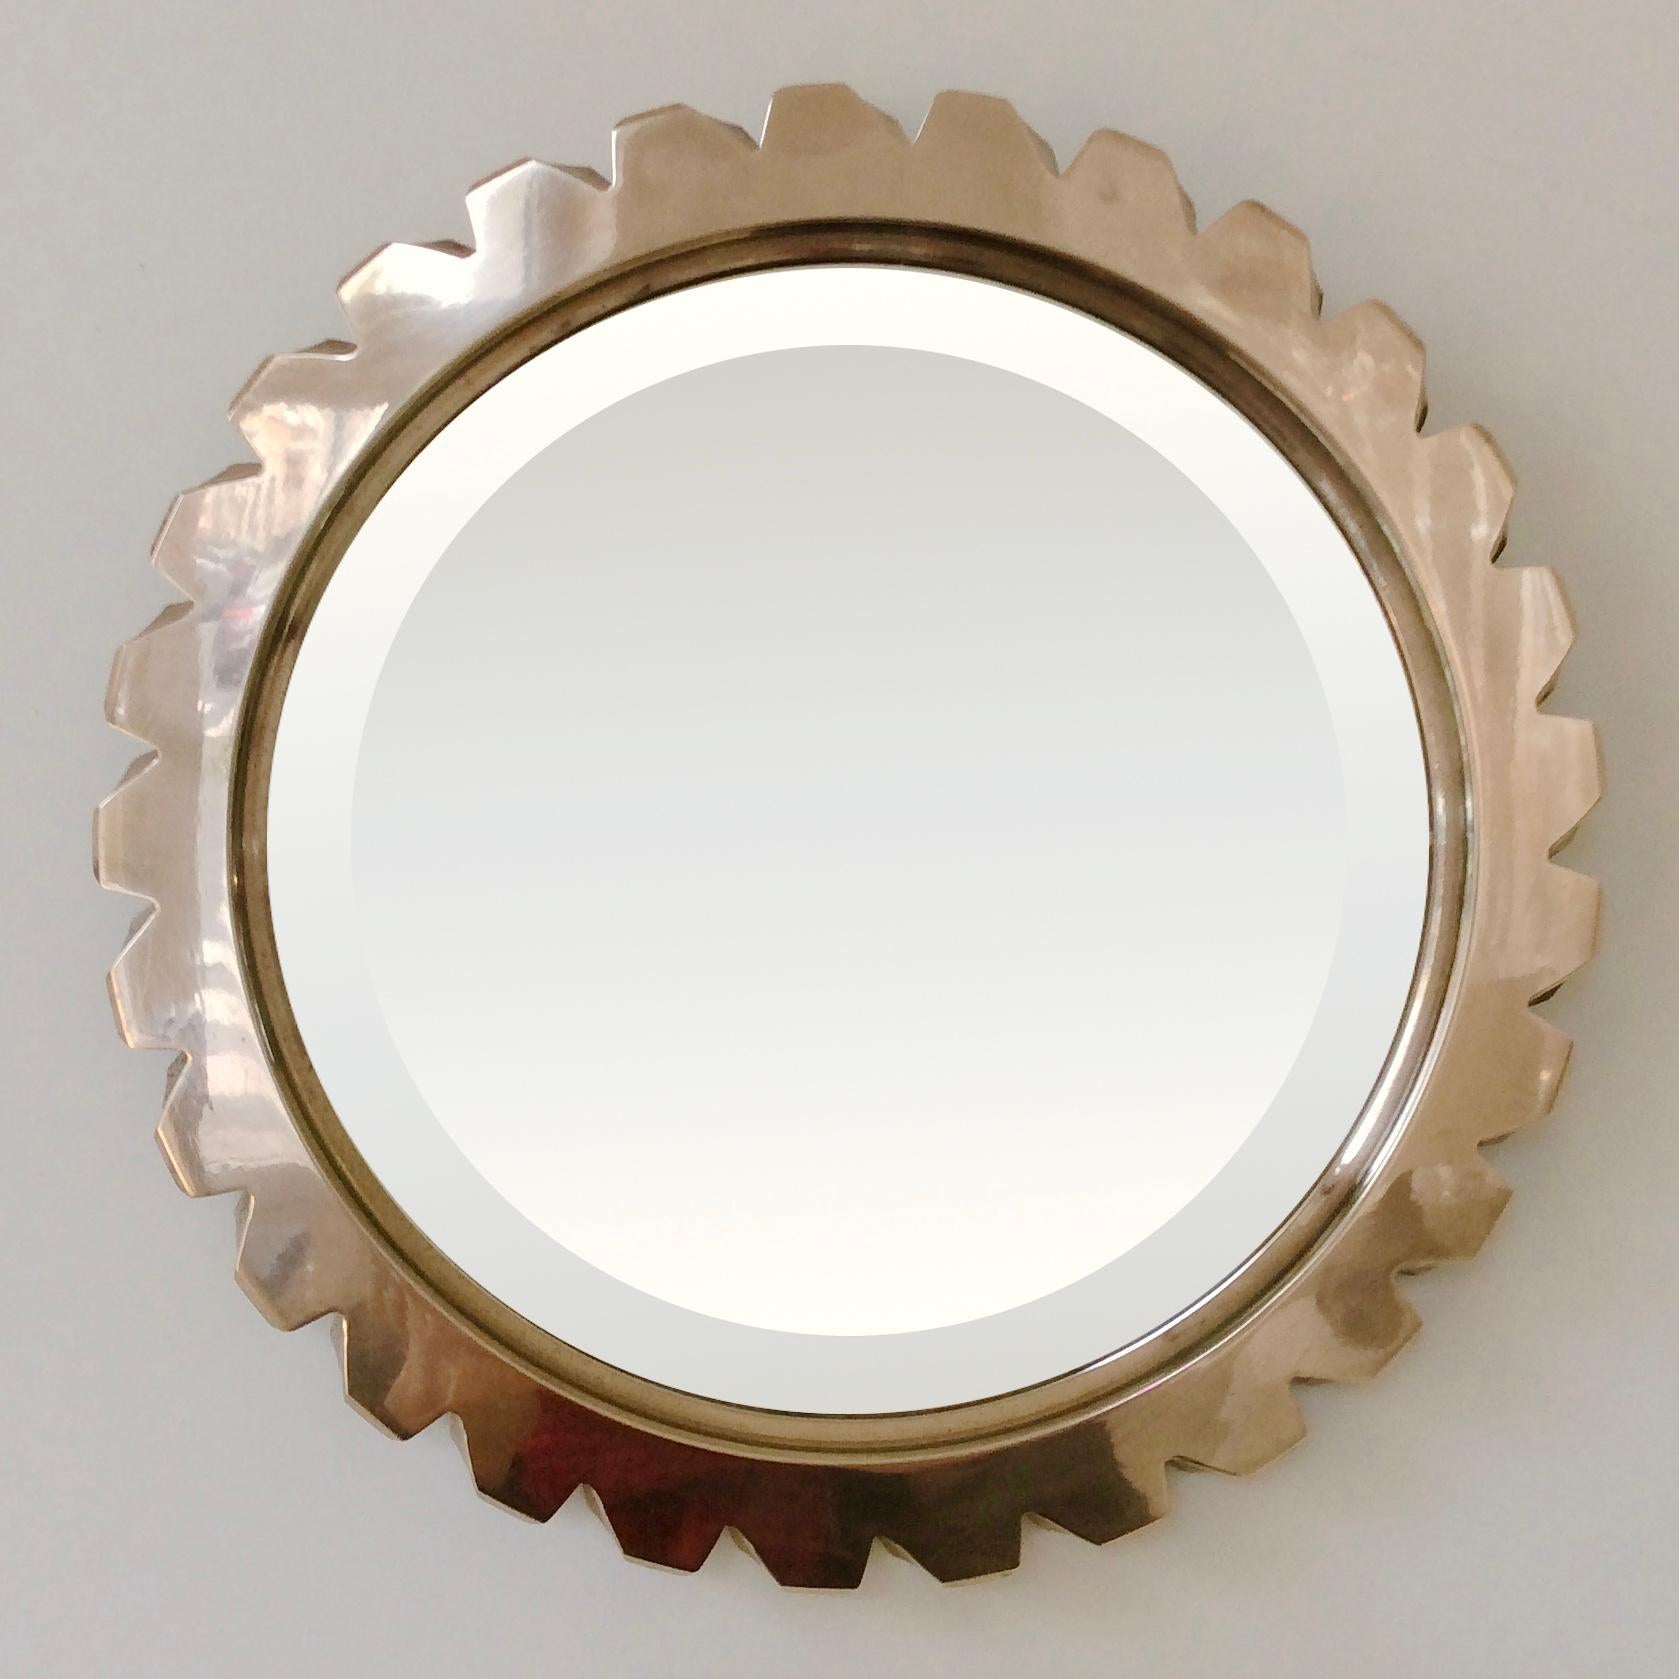 Nice quality Mid-century wall mirror, circa 1970, France.
Polished gold bronze, original mirror.
Dimensions: 26 cm diameter, 2 cm D.
All purchases are covered by our Buyer Protection Guarantee.
This item can be returned within 7 days of